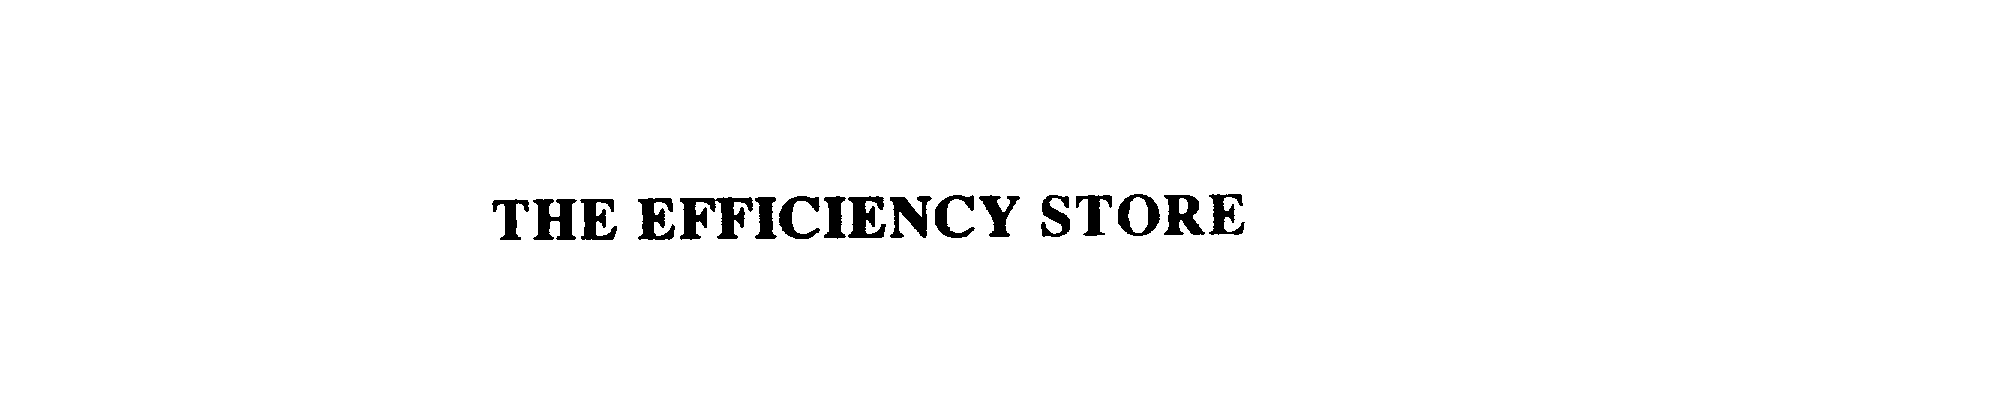  THE EFFICIENCY STORE